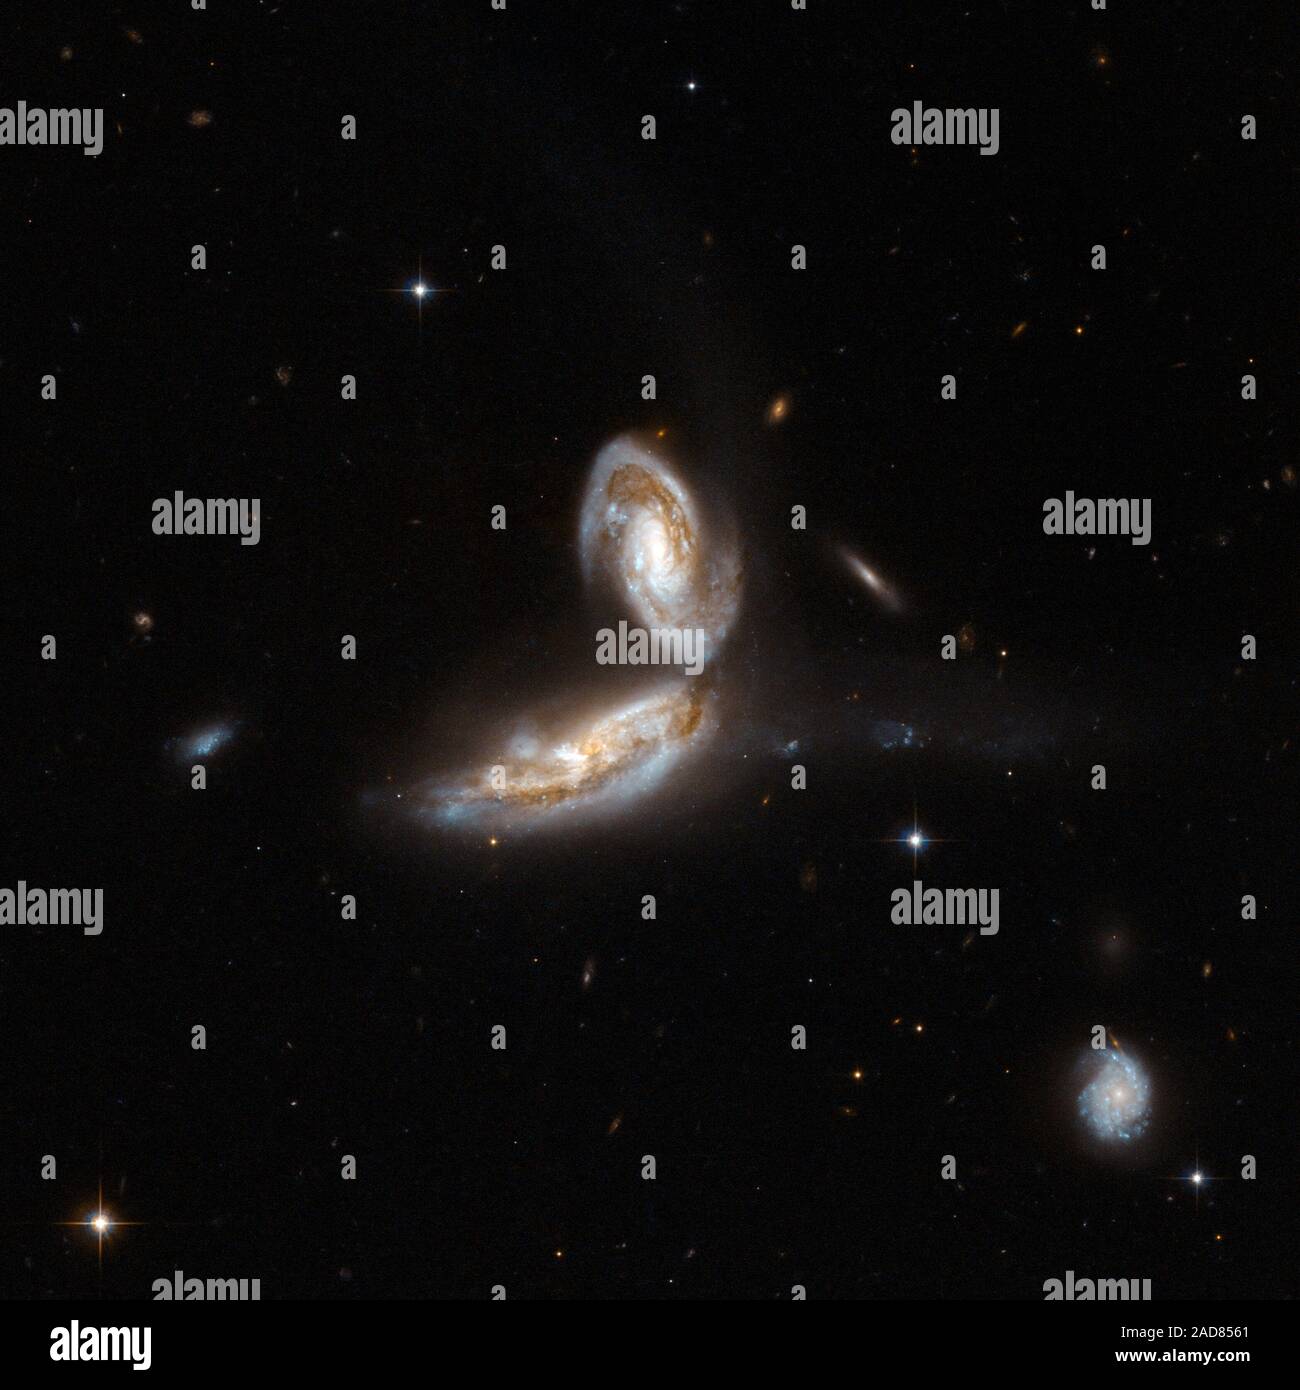 NGC 5331 is a pair of interacting galaxies beginning to hold their arms . There is a blue trail which appears in the image flowing to the right of the system. NGC 5331 is very bright in the infrared, with about a hundred billion times the luminosity of the Sun. It is located in the constellation Virgo, the Maiden, about 450 million light-years away from Earth.   This image is part of a large collection of 59 images of merging galaxies taken by the Hubble Space Telescope and released on the occasion of its 18th anniversary on 24th April 2008.    Object Names: NGC 5331, VV 253, KPG 401    Image Stock Photo